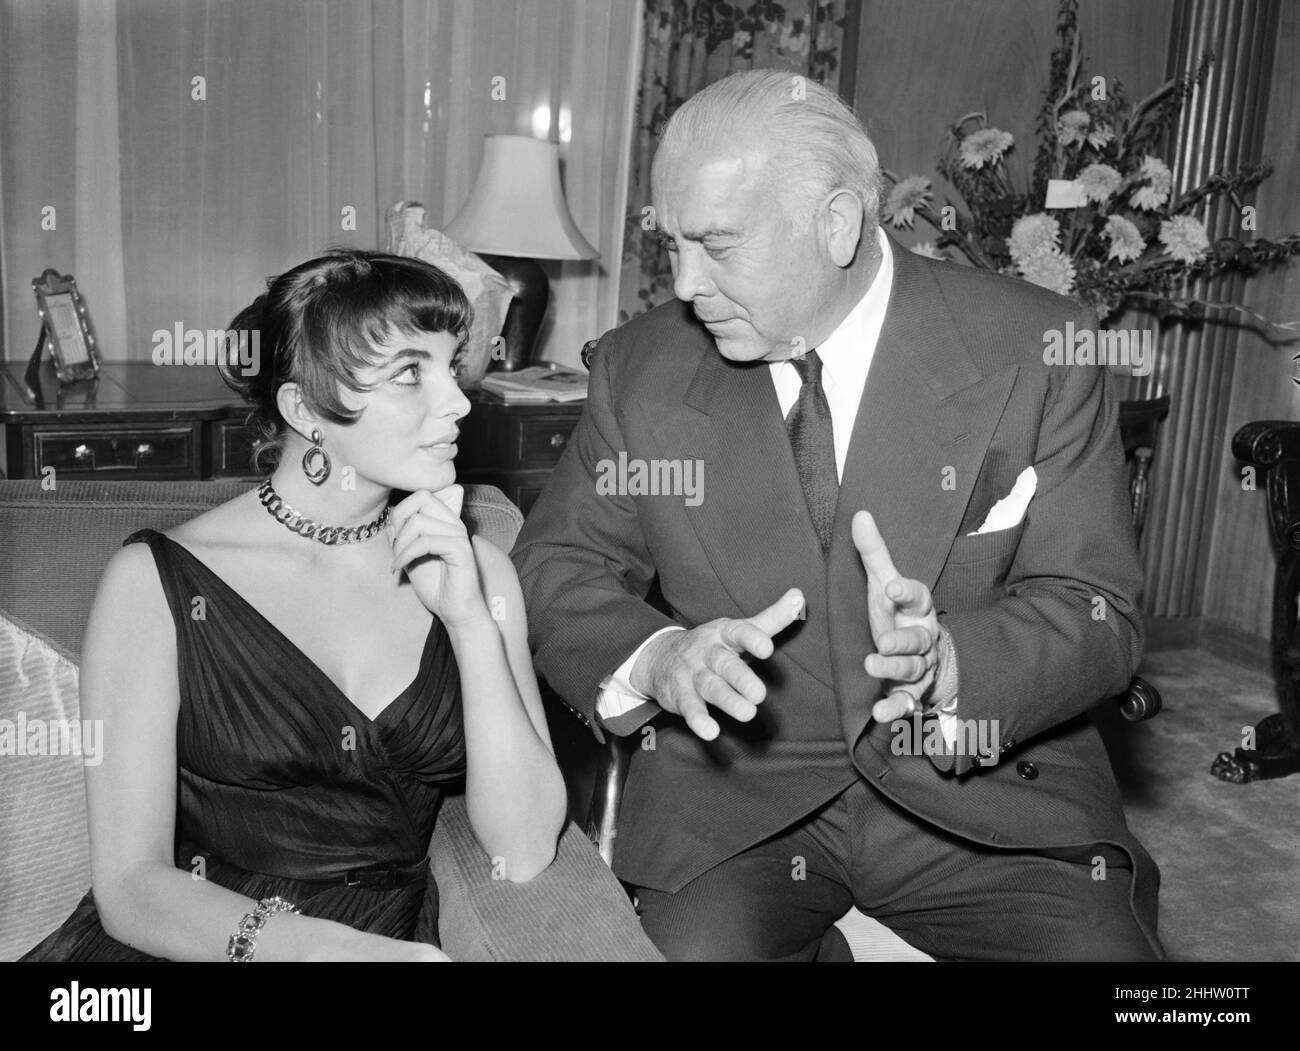 Joan Collins, actress, pictured at home, with family and friends, London, 4th October 1955. Pictured with Spyros Panagiotis Skouras, Greek American motion picture pioneer and movie executive who was the president of the 20th Century Fox from 1942 to 1962. Stock Photo